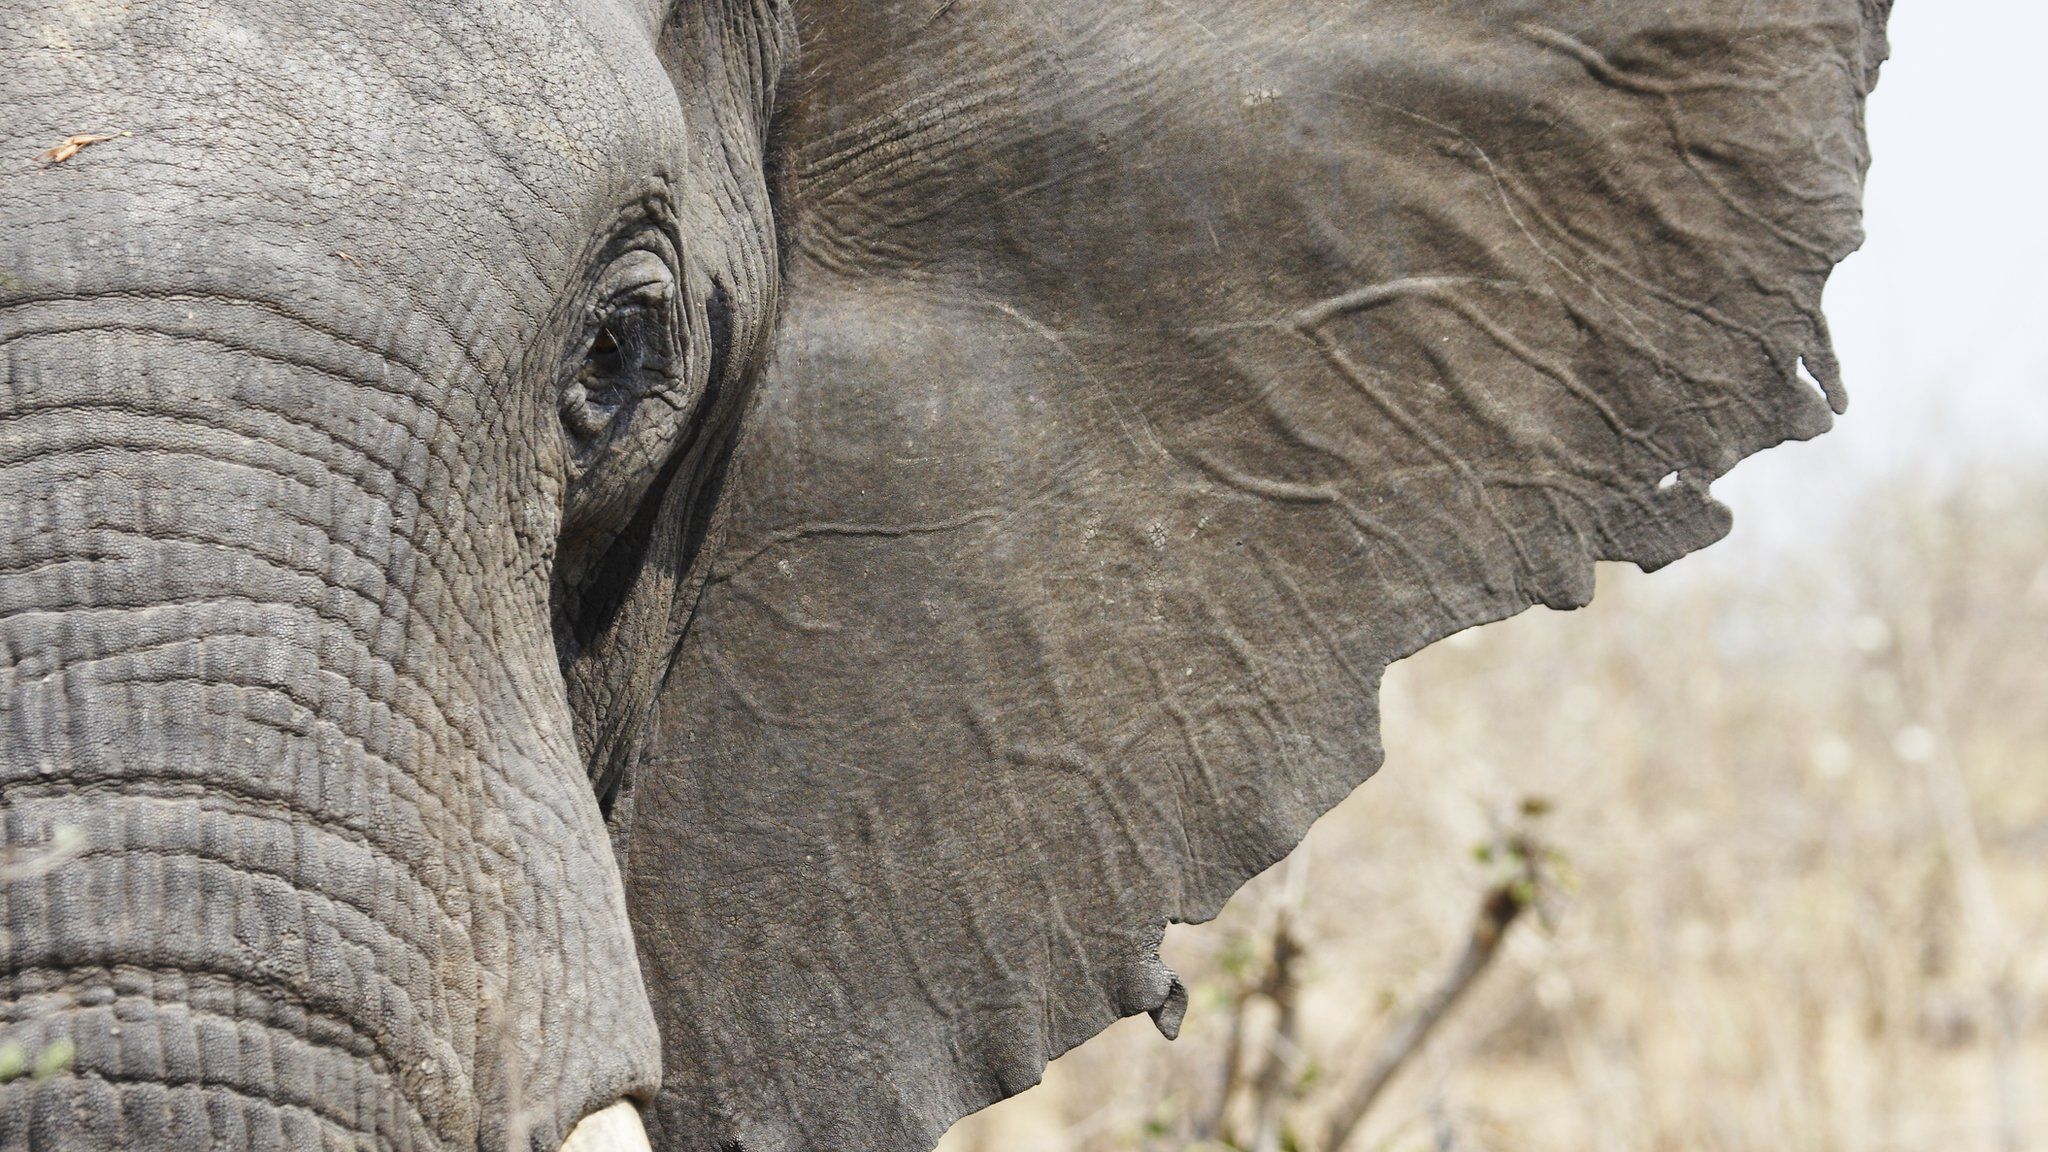 Close up image of face of an African elephant